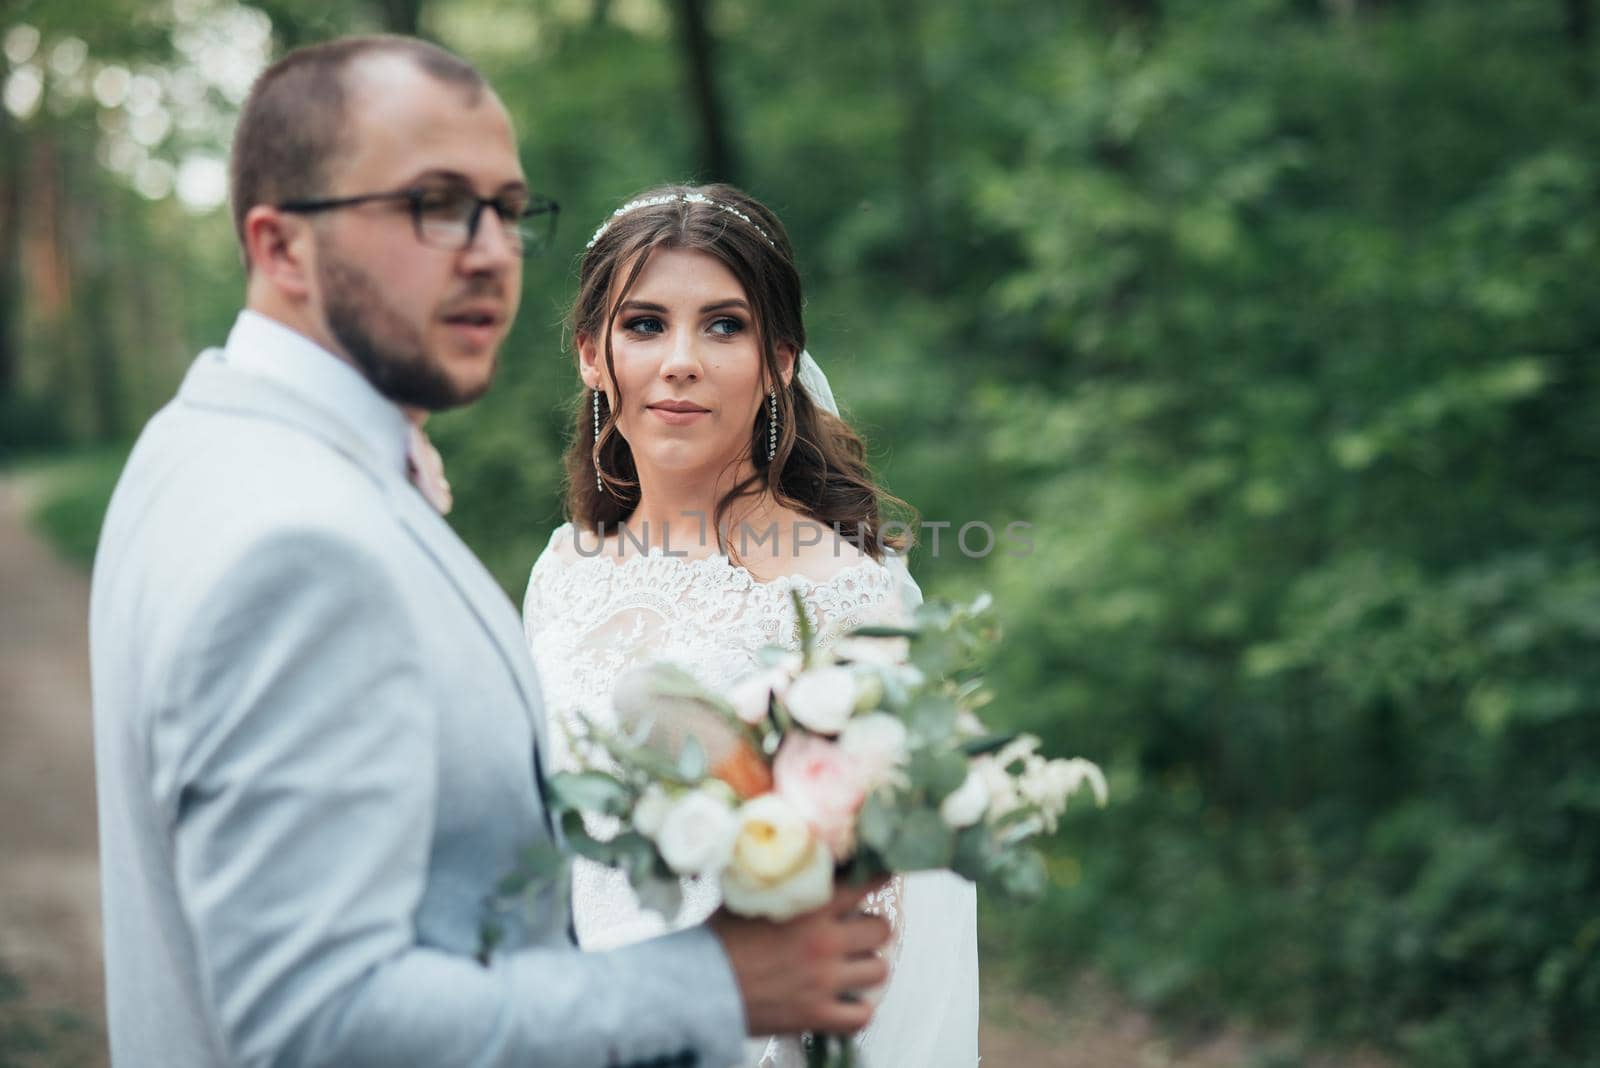 Wedding photo of the bride and groom in a gray-pink color on nature in the forest and rocks. by lunarts